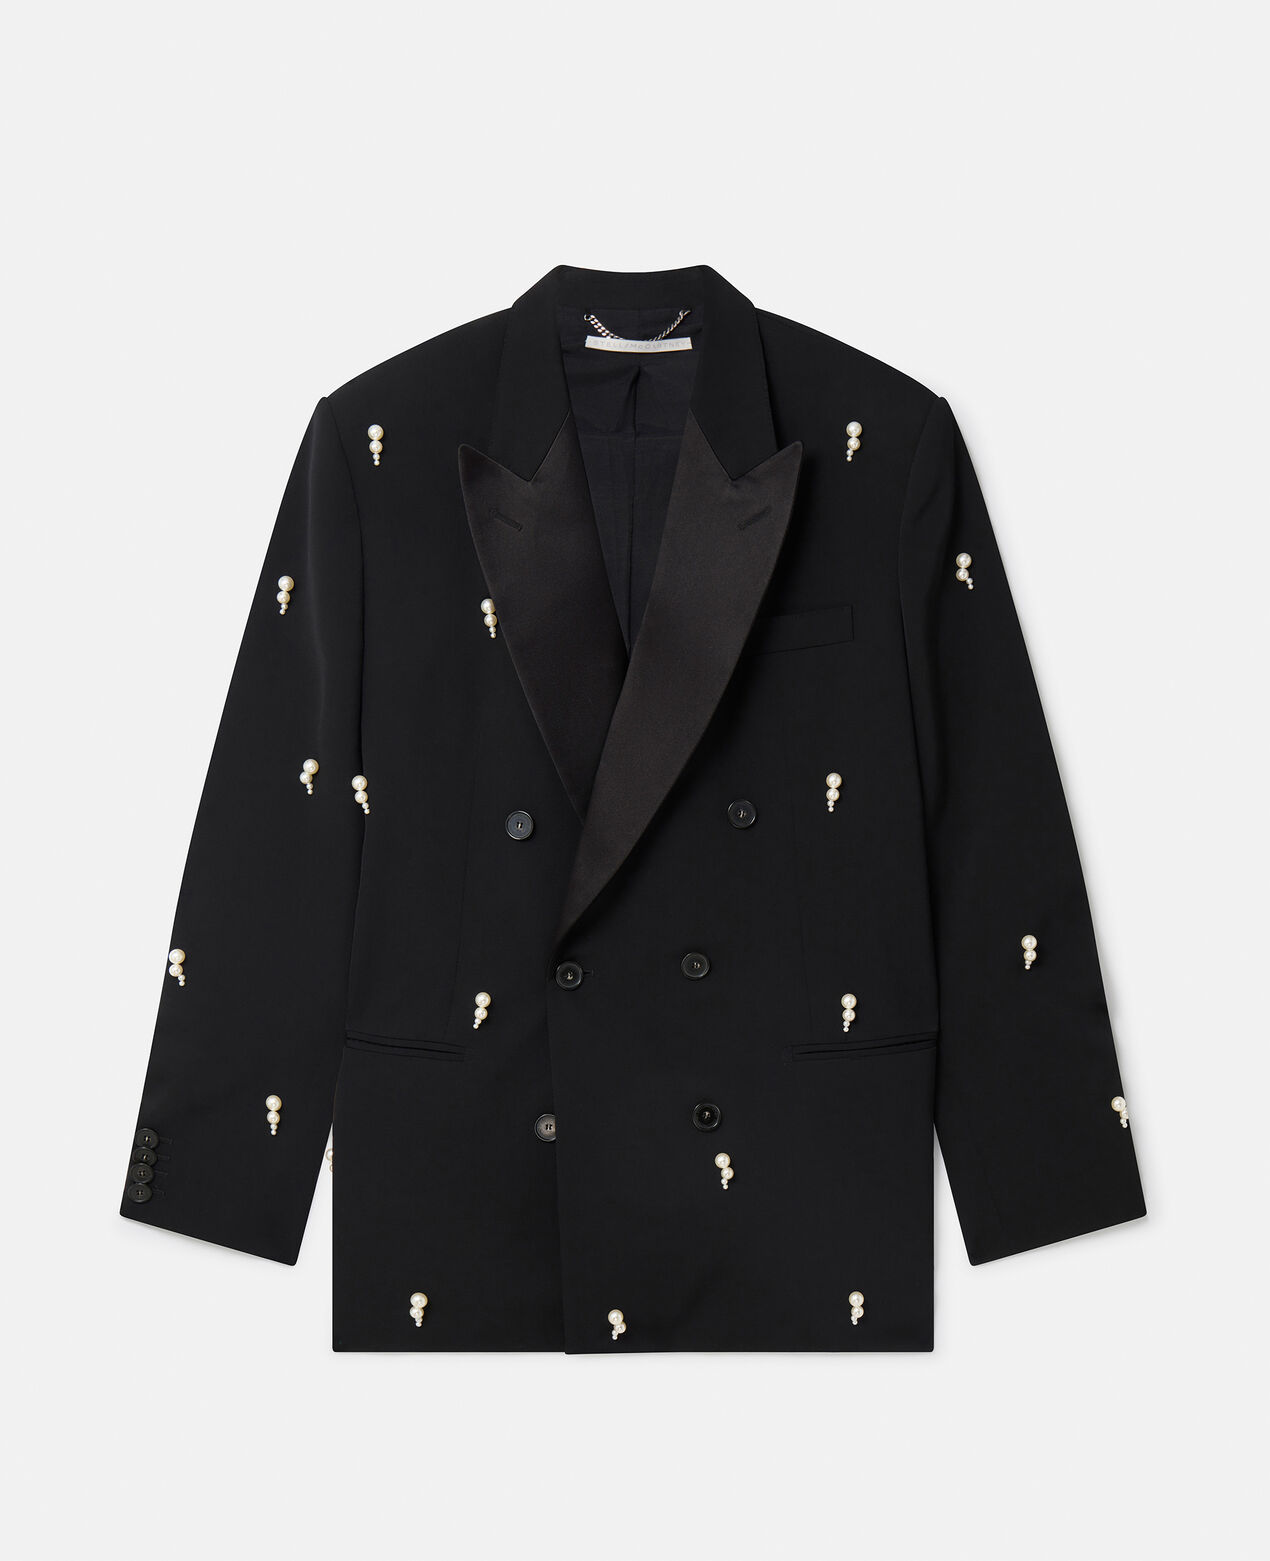 Stella McCartney + Pearl Embroidery Oversized Double-Breasted Blazer